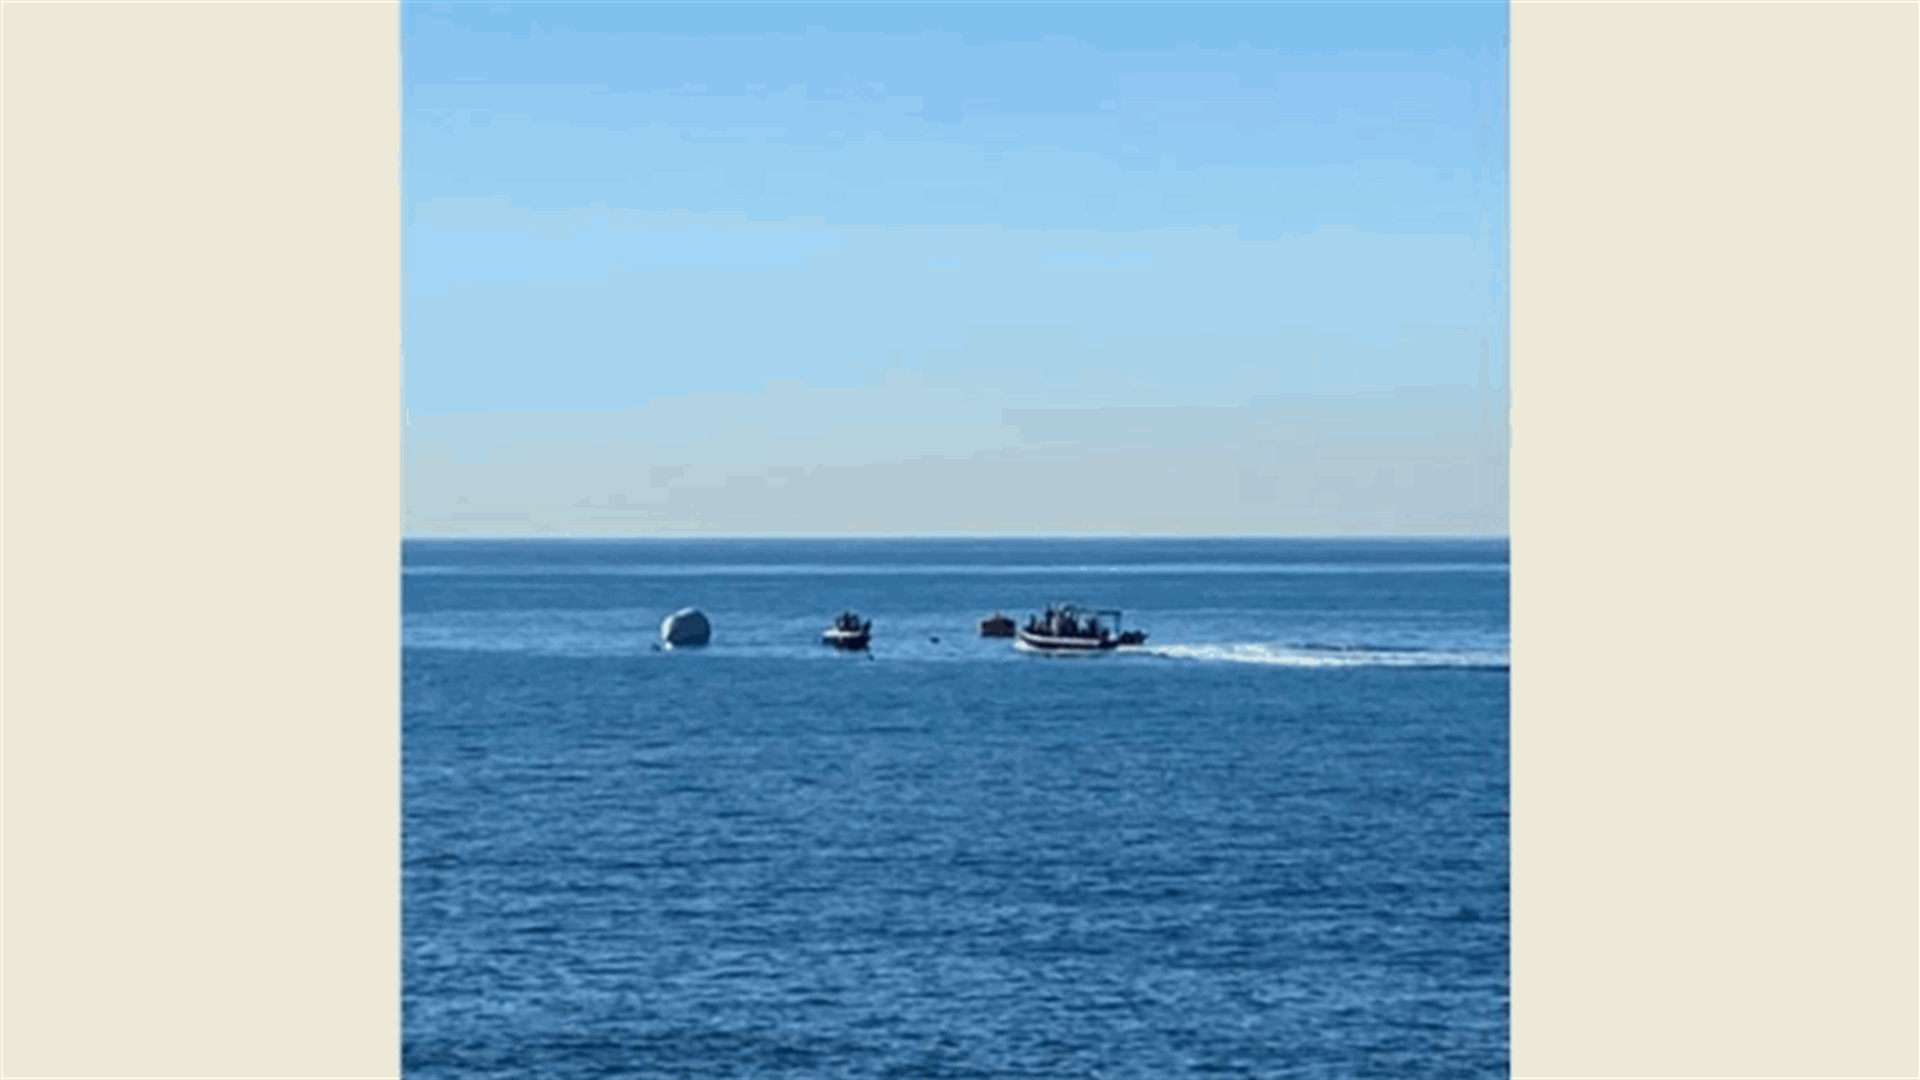 8 people on a boat rescued off Amchit coast